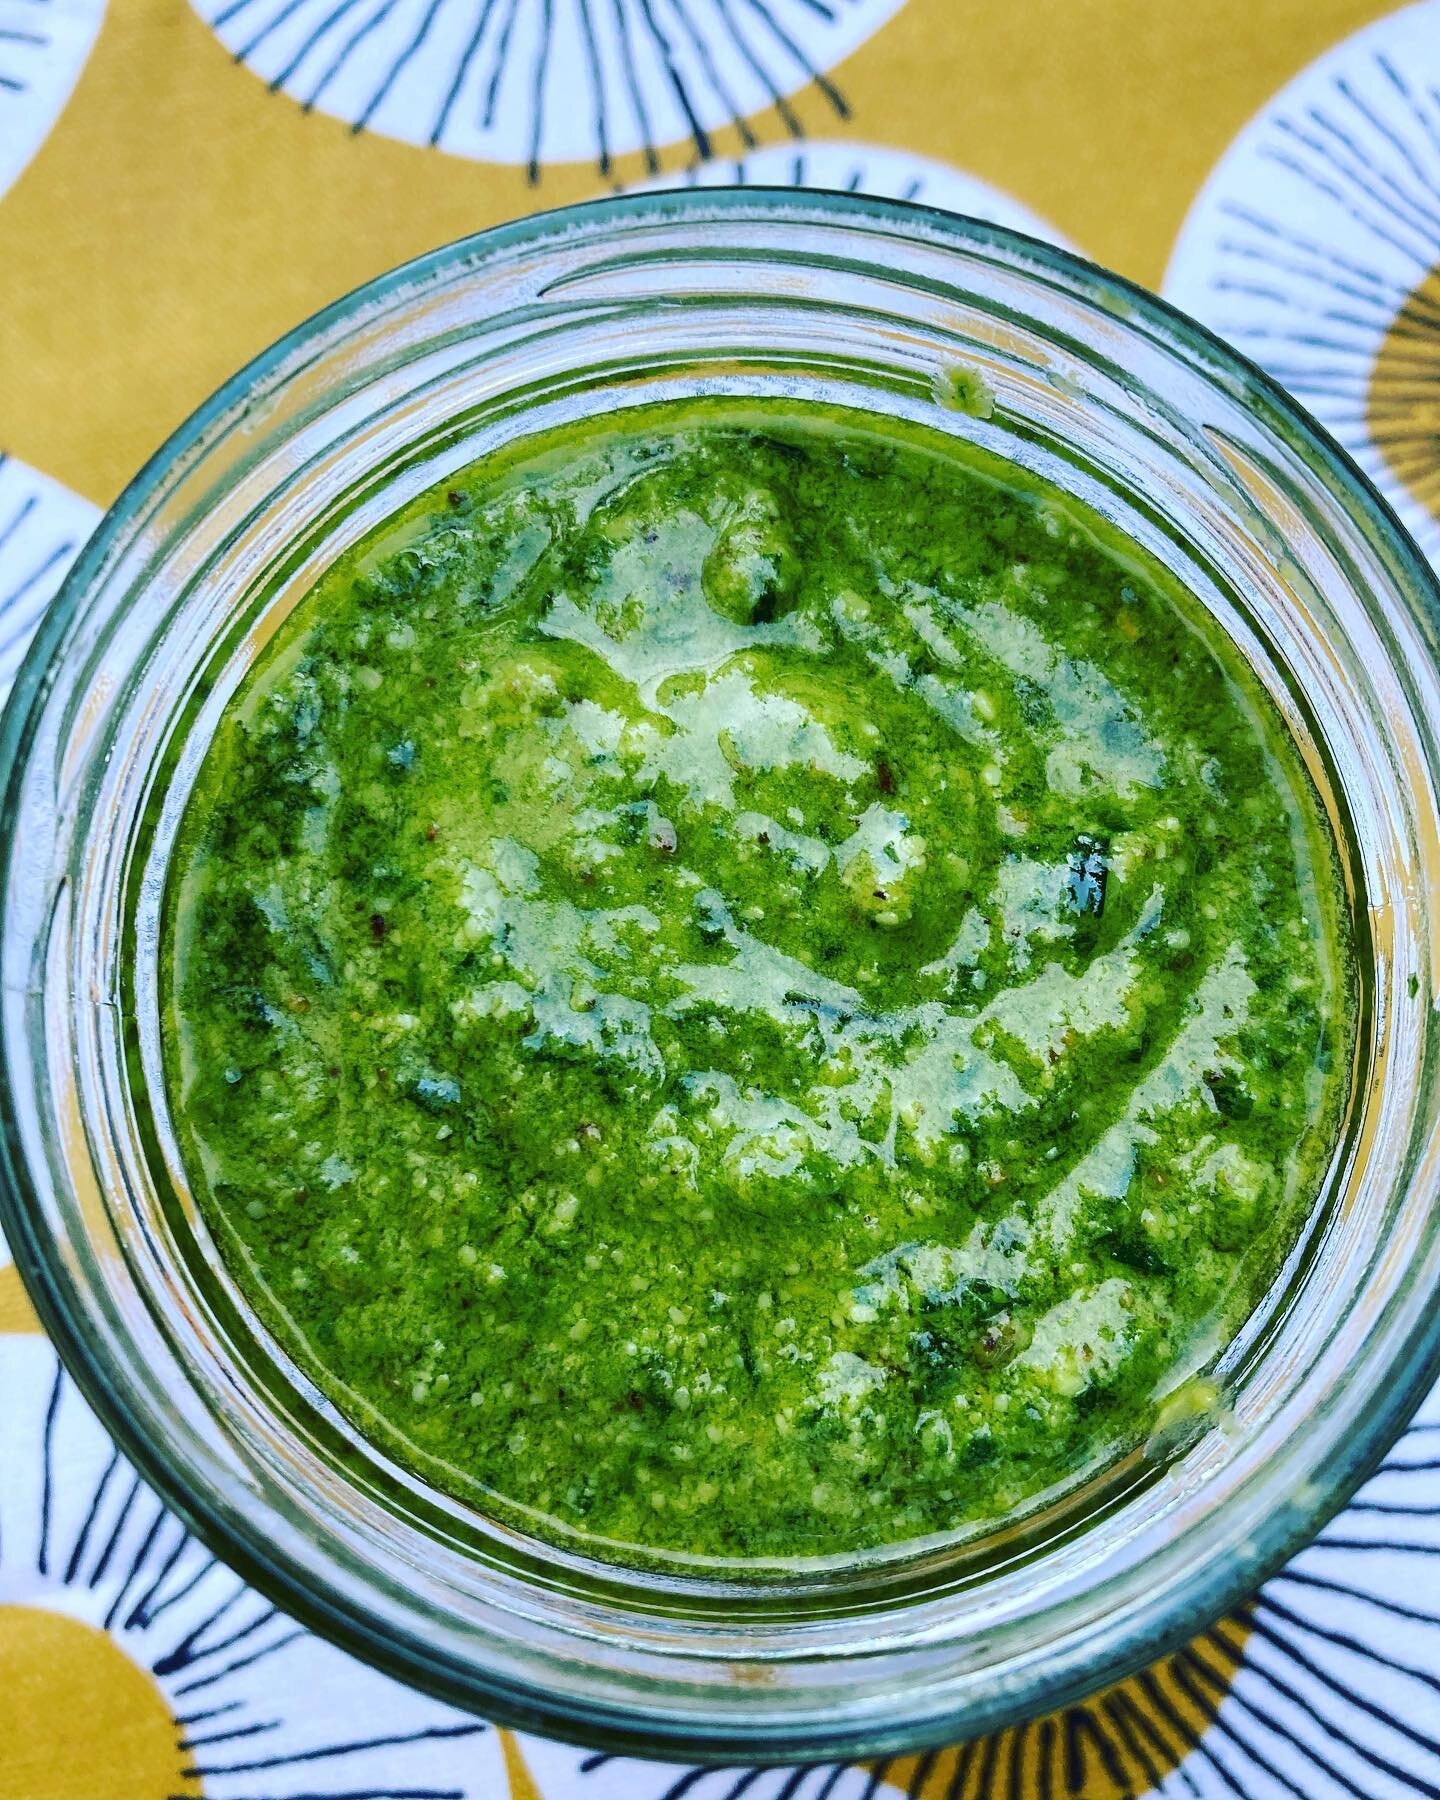 Guess what I made?  Yes of course, wild garlic pesto! Wild garlic has fantastic health benefits like being antimicrobial, antiseptic and effective at helping to lower blood pressure to name a few. Herbal Medicine in your kitchen! 🌱😊 #herbalmedicine